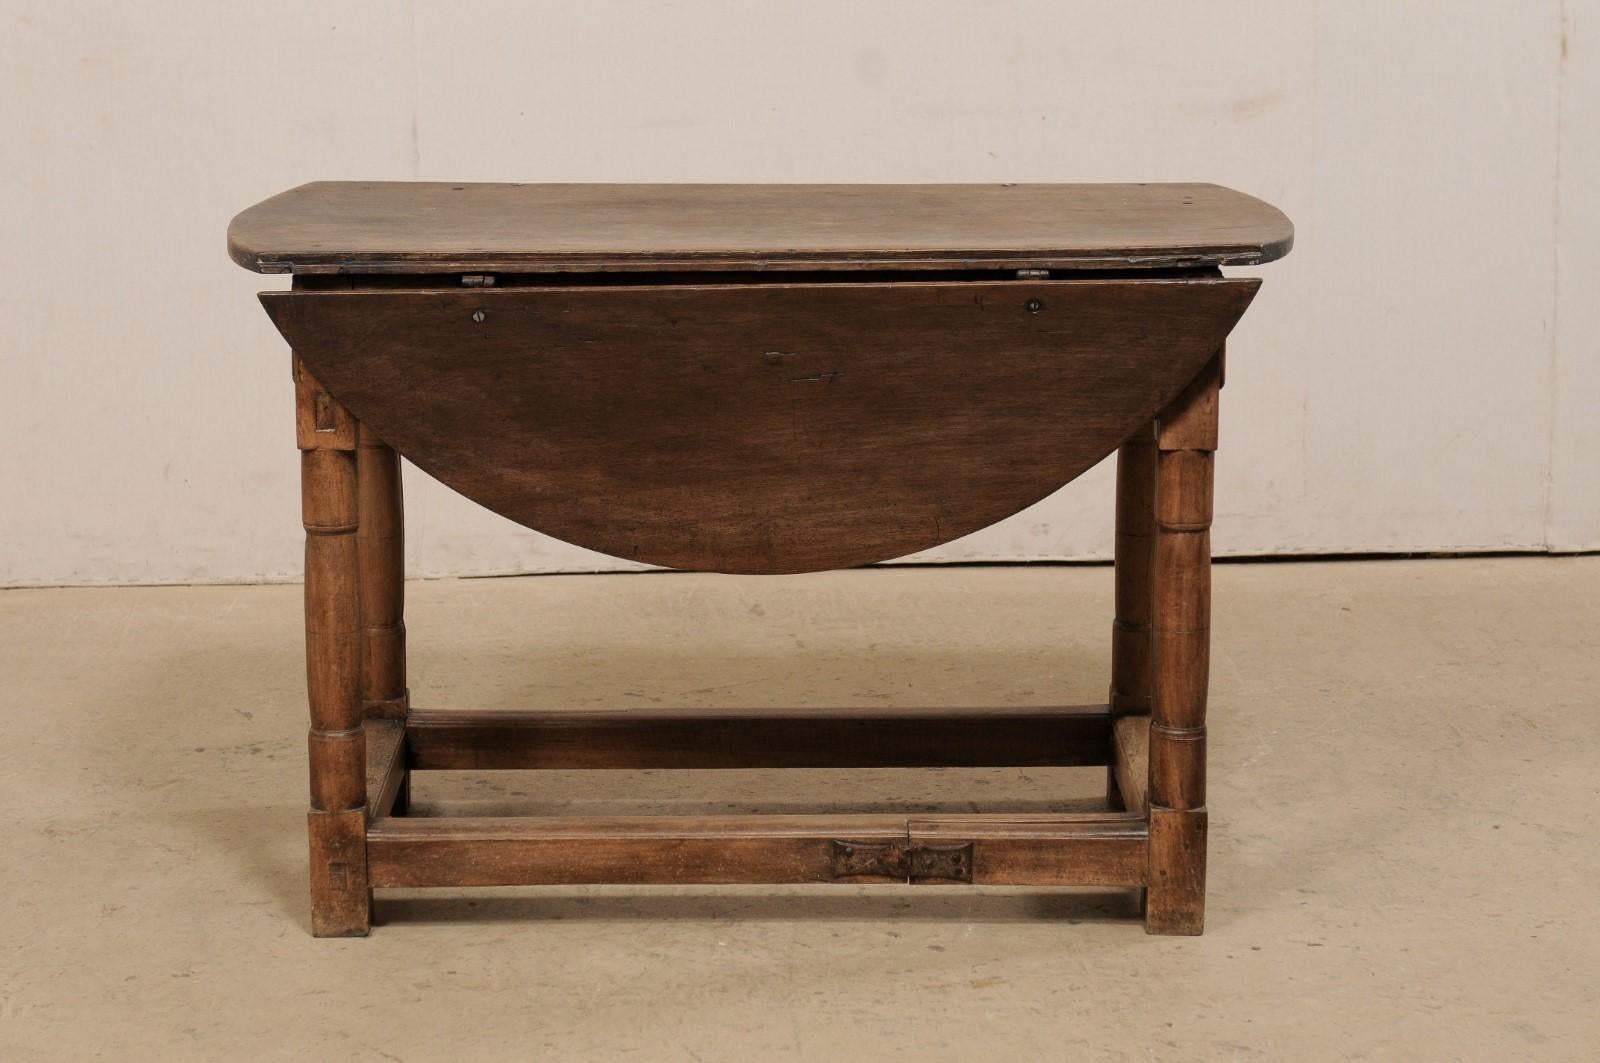 Italian Double Gate-Leg Table w/Drop Leaves on Either Side, Turn of 18th/19th C. For Sale 2